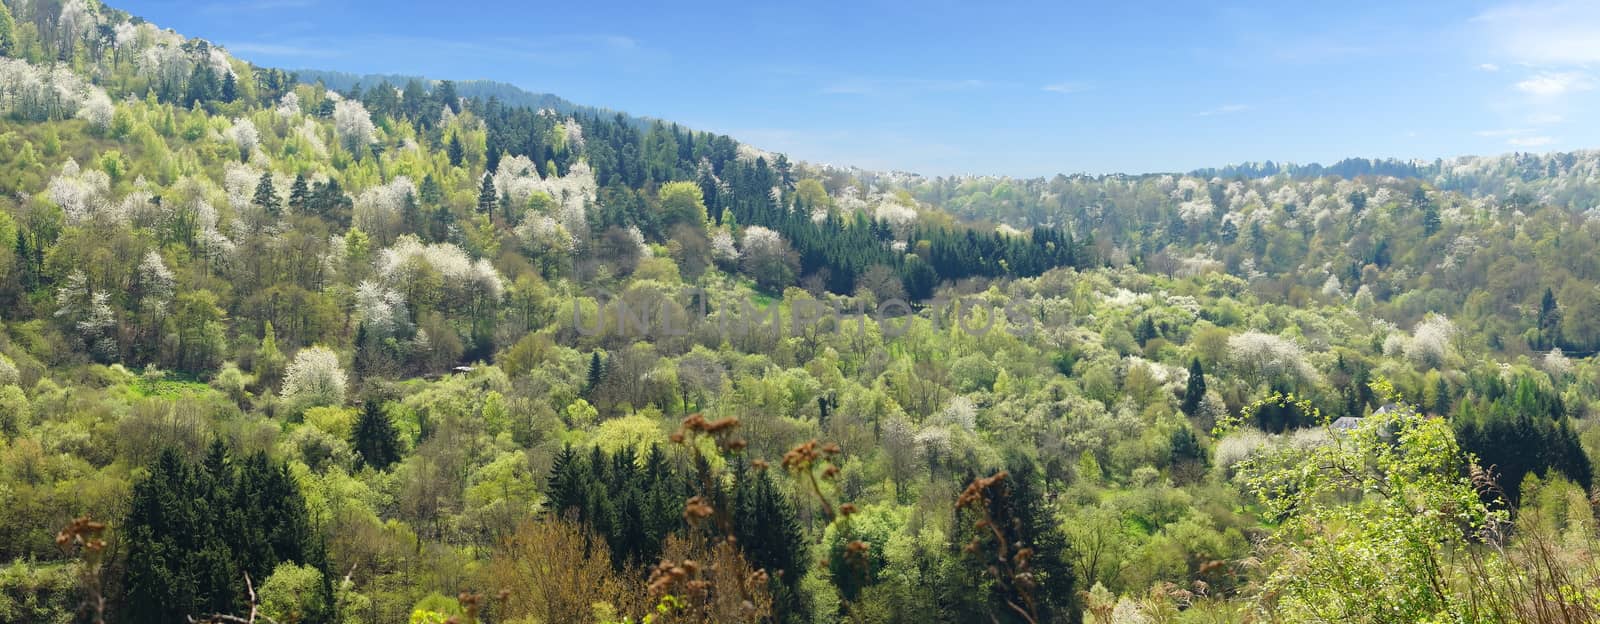 colorful mixed forest panoramic in spring with white flowering, light green and dark green trees